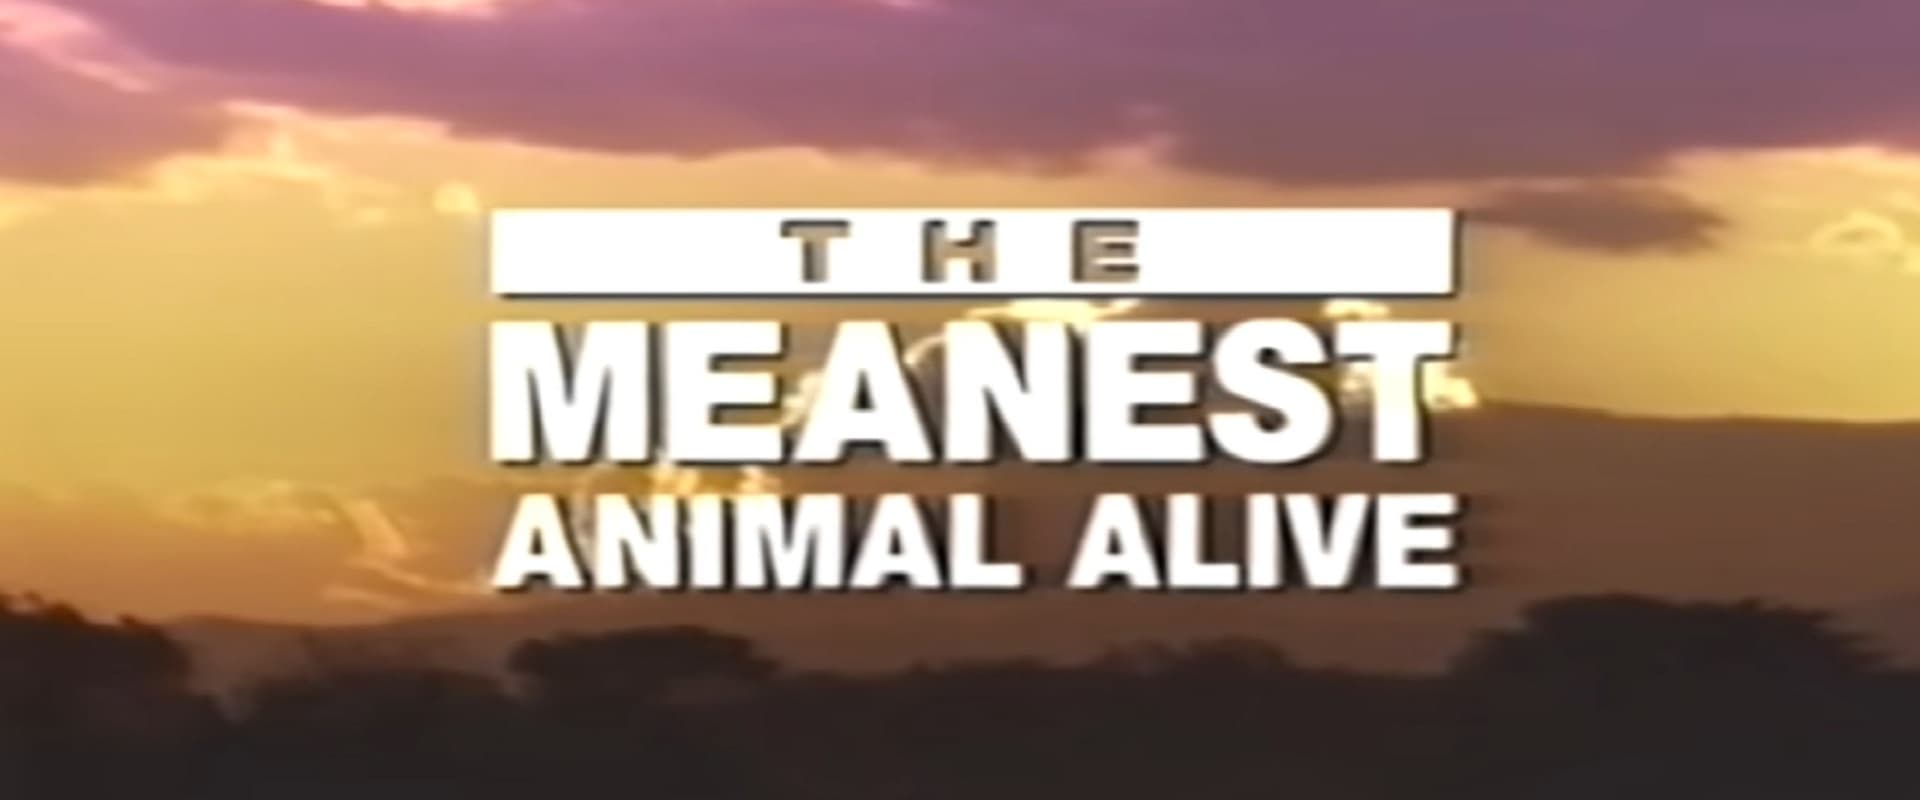 Time Life Animal Oddities: The Meanest Animal Alive